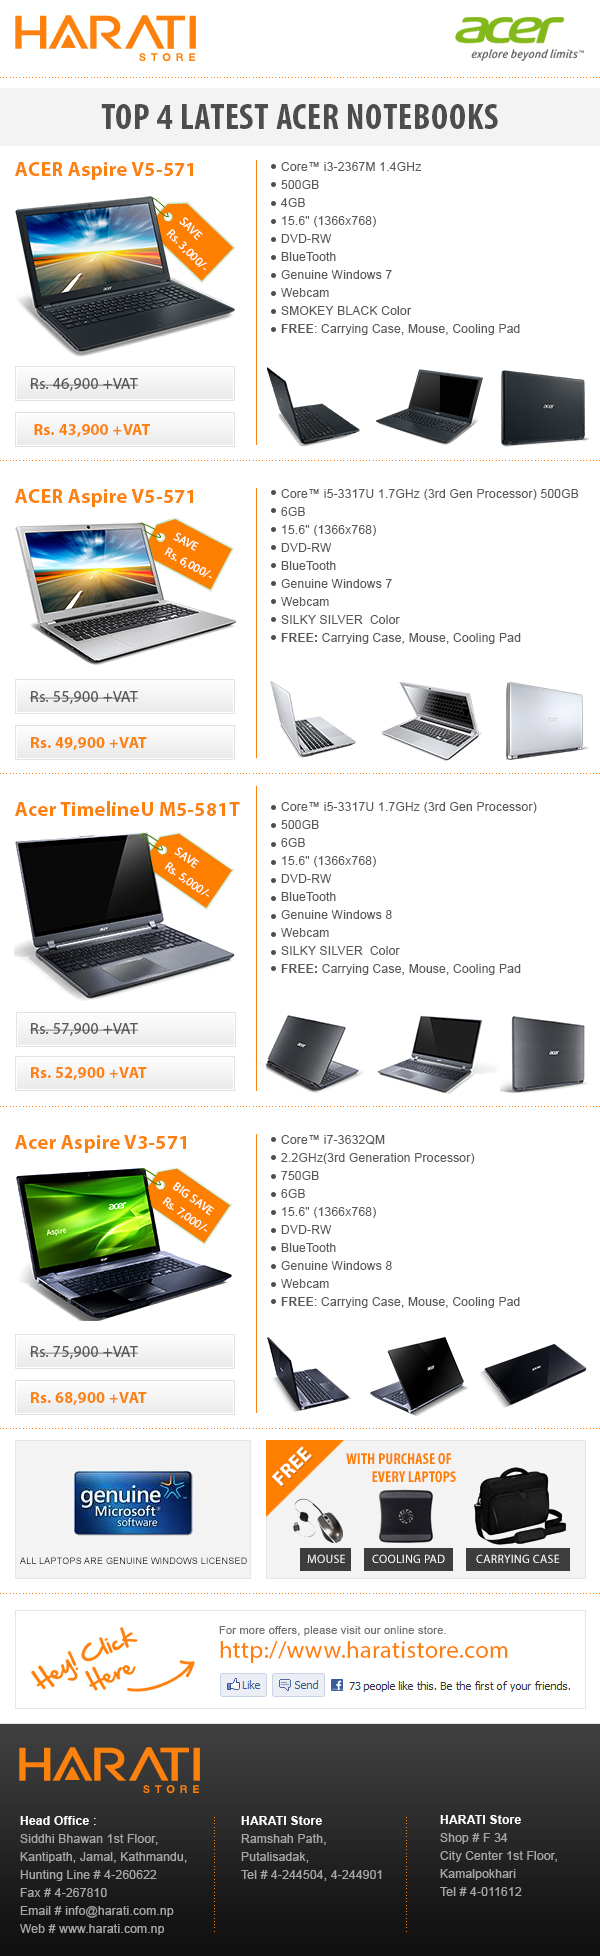 Top 4 Latest Acer Notebooks